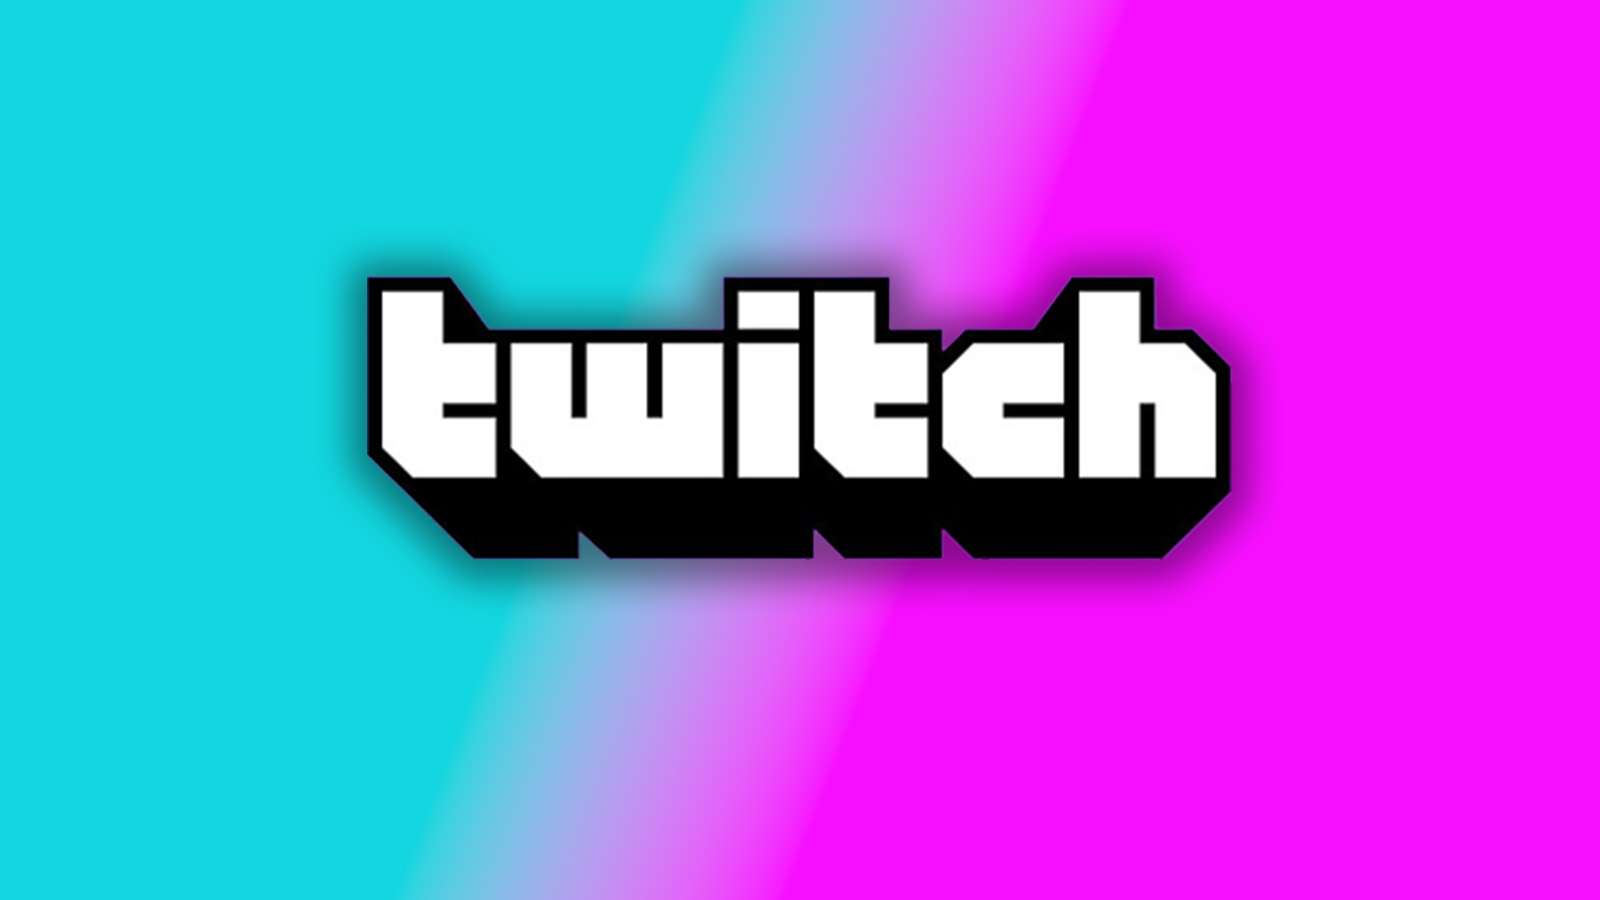 Twitch logo on purple and blue gradient